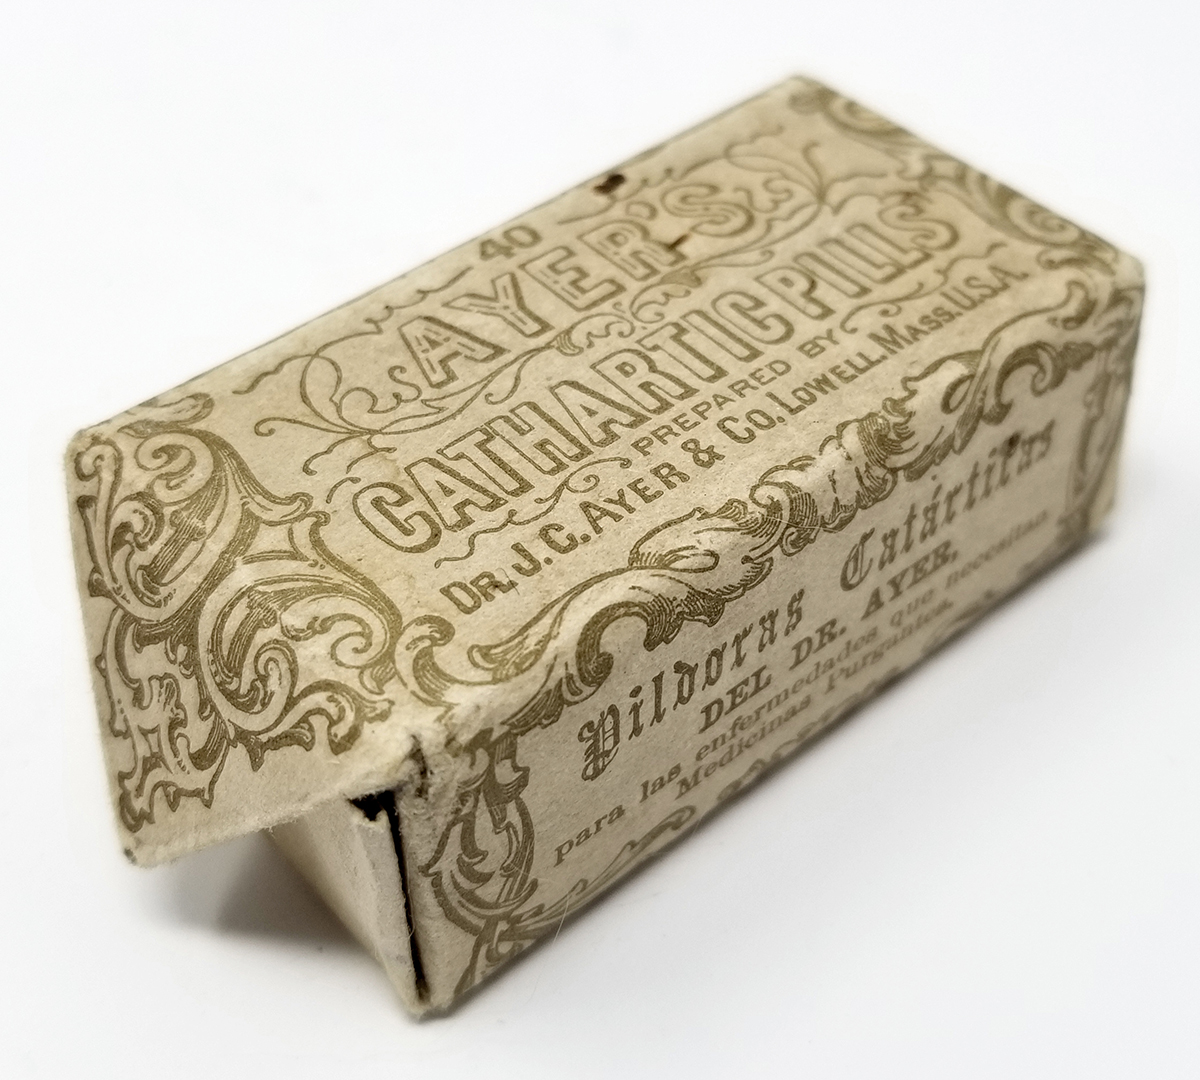 Ayer's Cathartic Pills Sealed Victorian Medicine - Cabinet of Curiosities